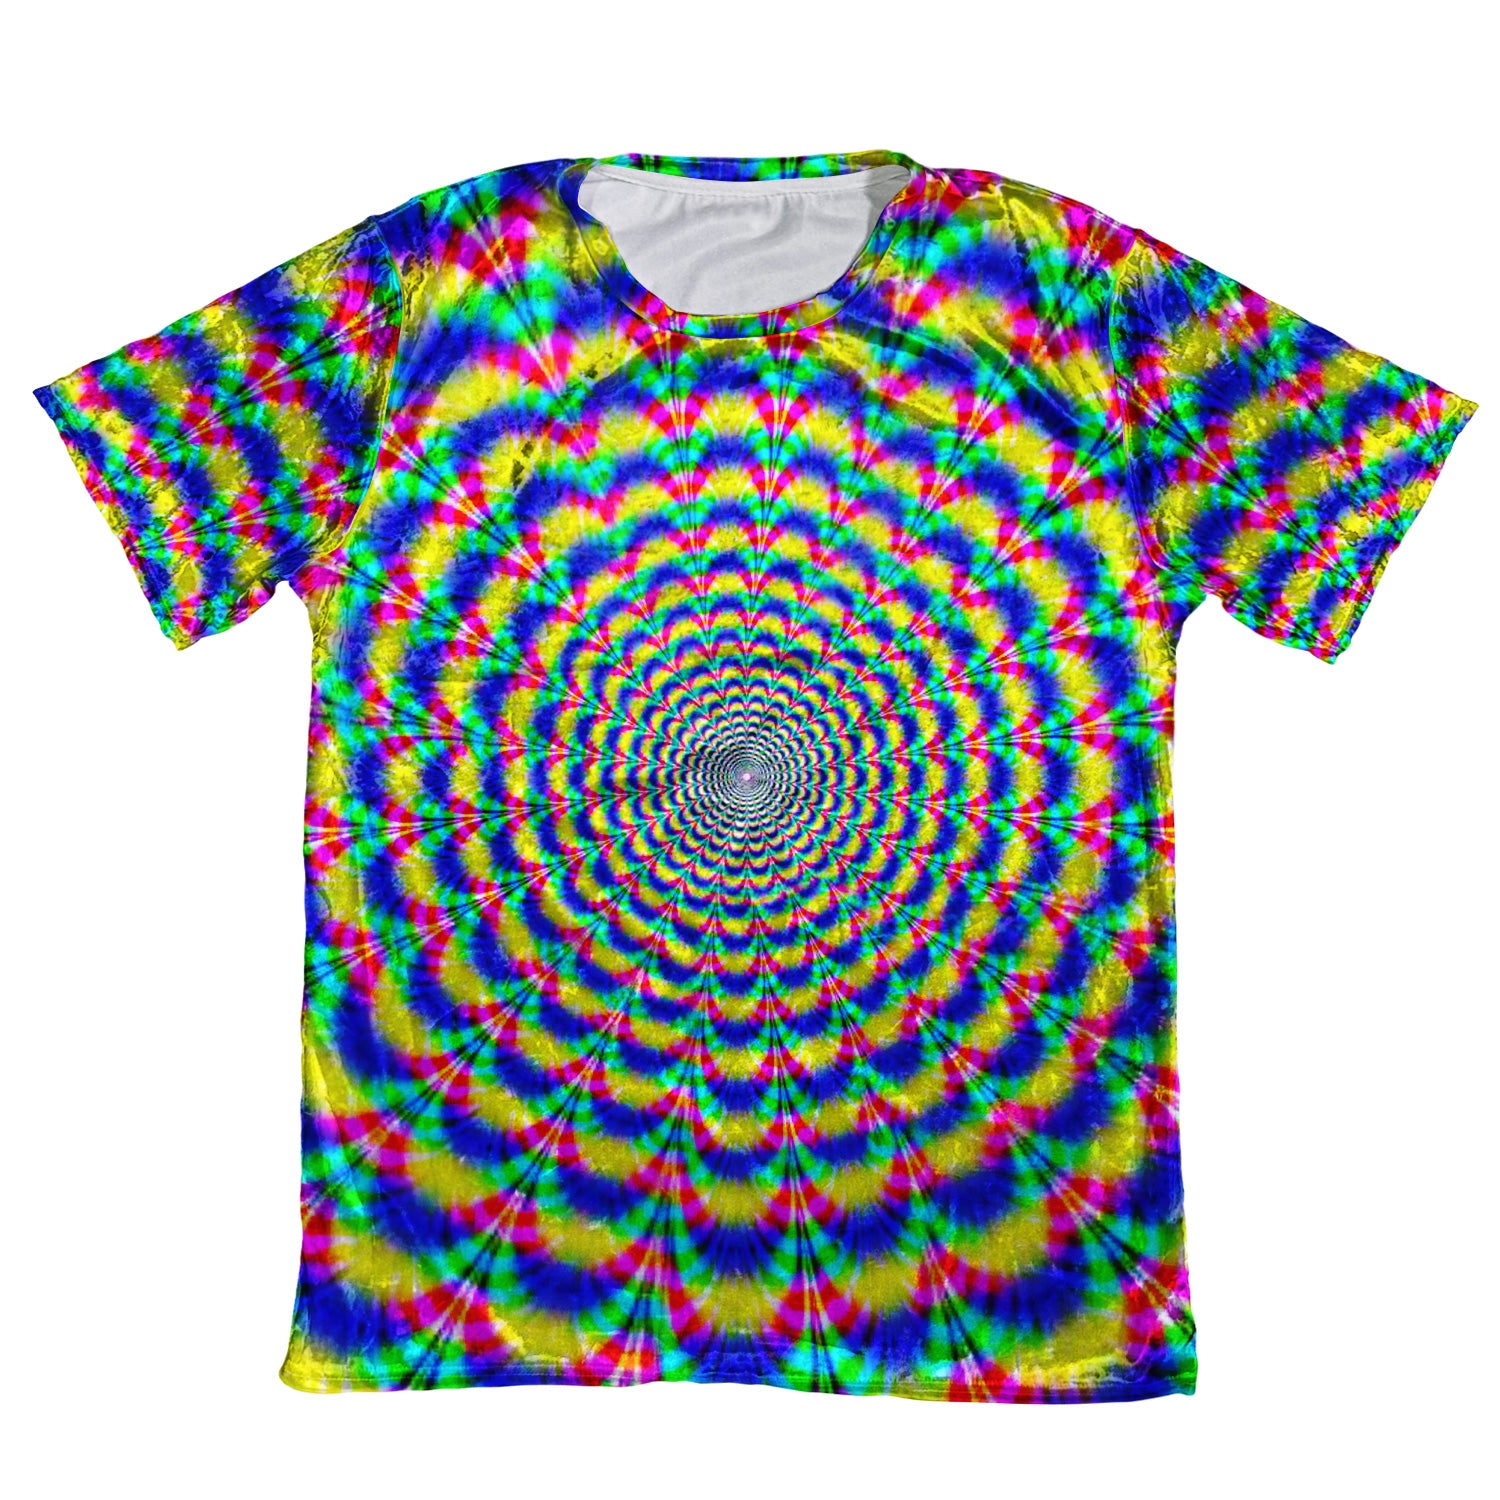 Shroom Beach - Psychedelic Apparel & Accessories